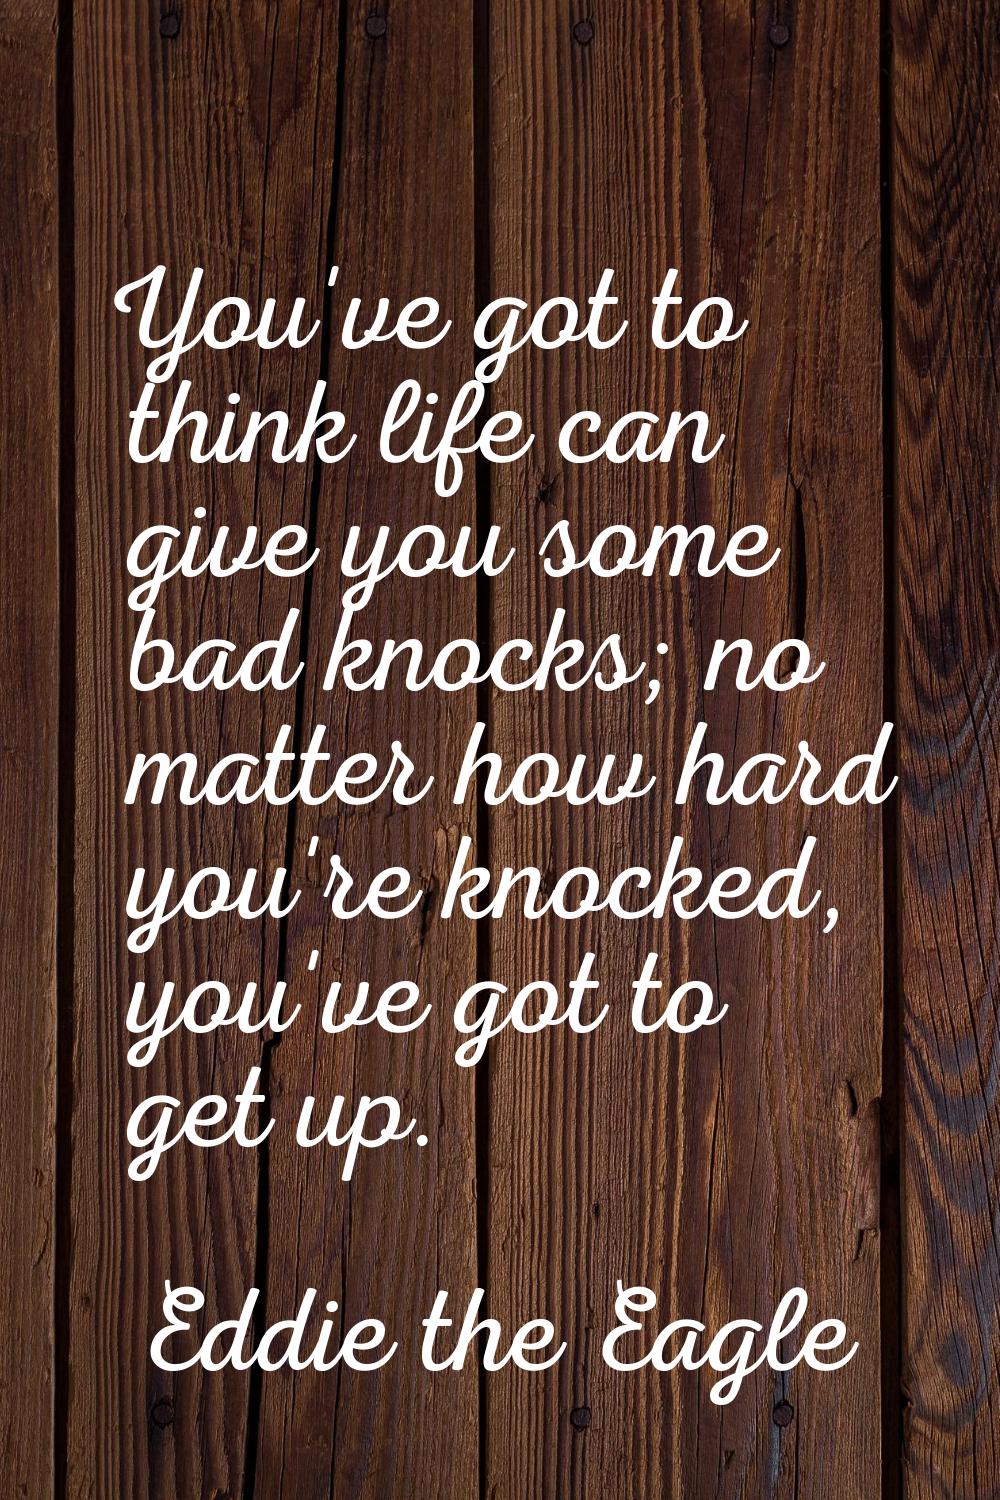 You've got to think life can give you some bad knocks; no matter how hard you're knocked, you've go